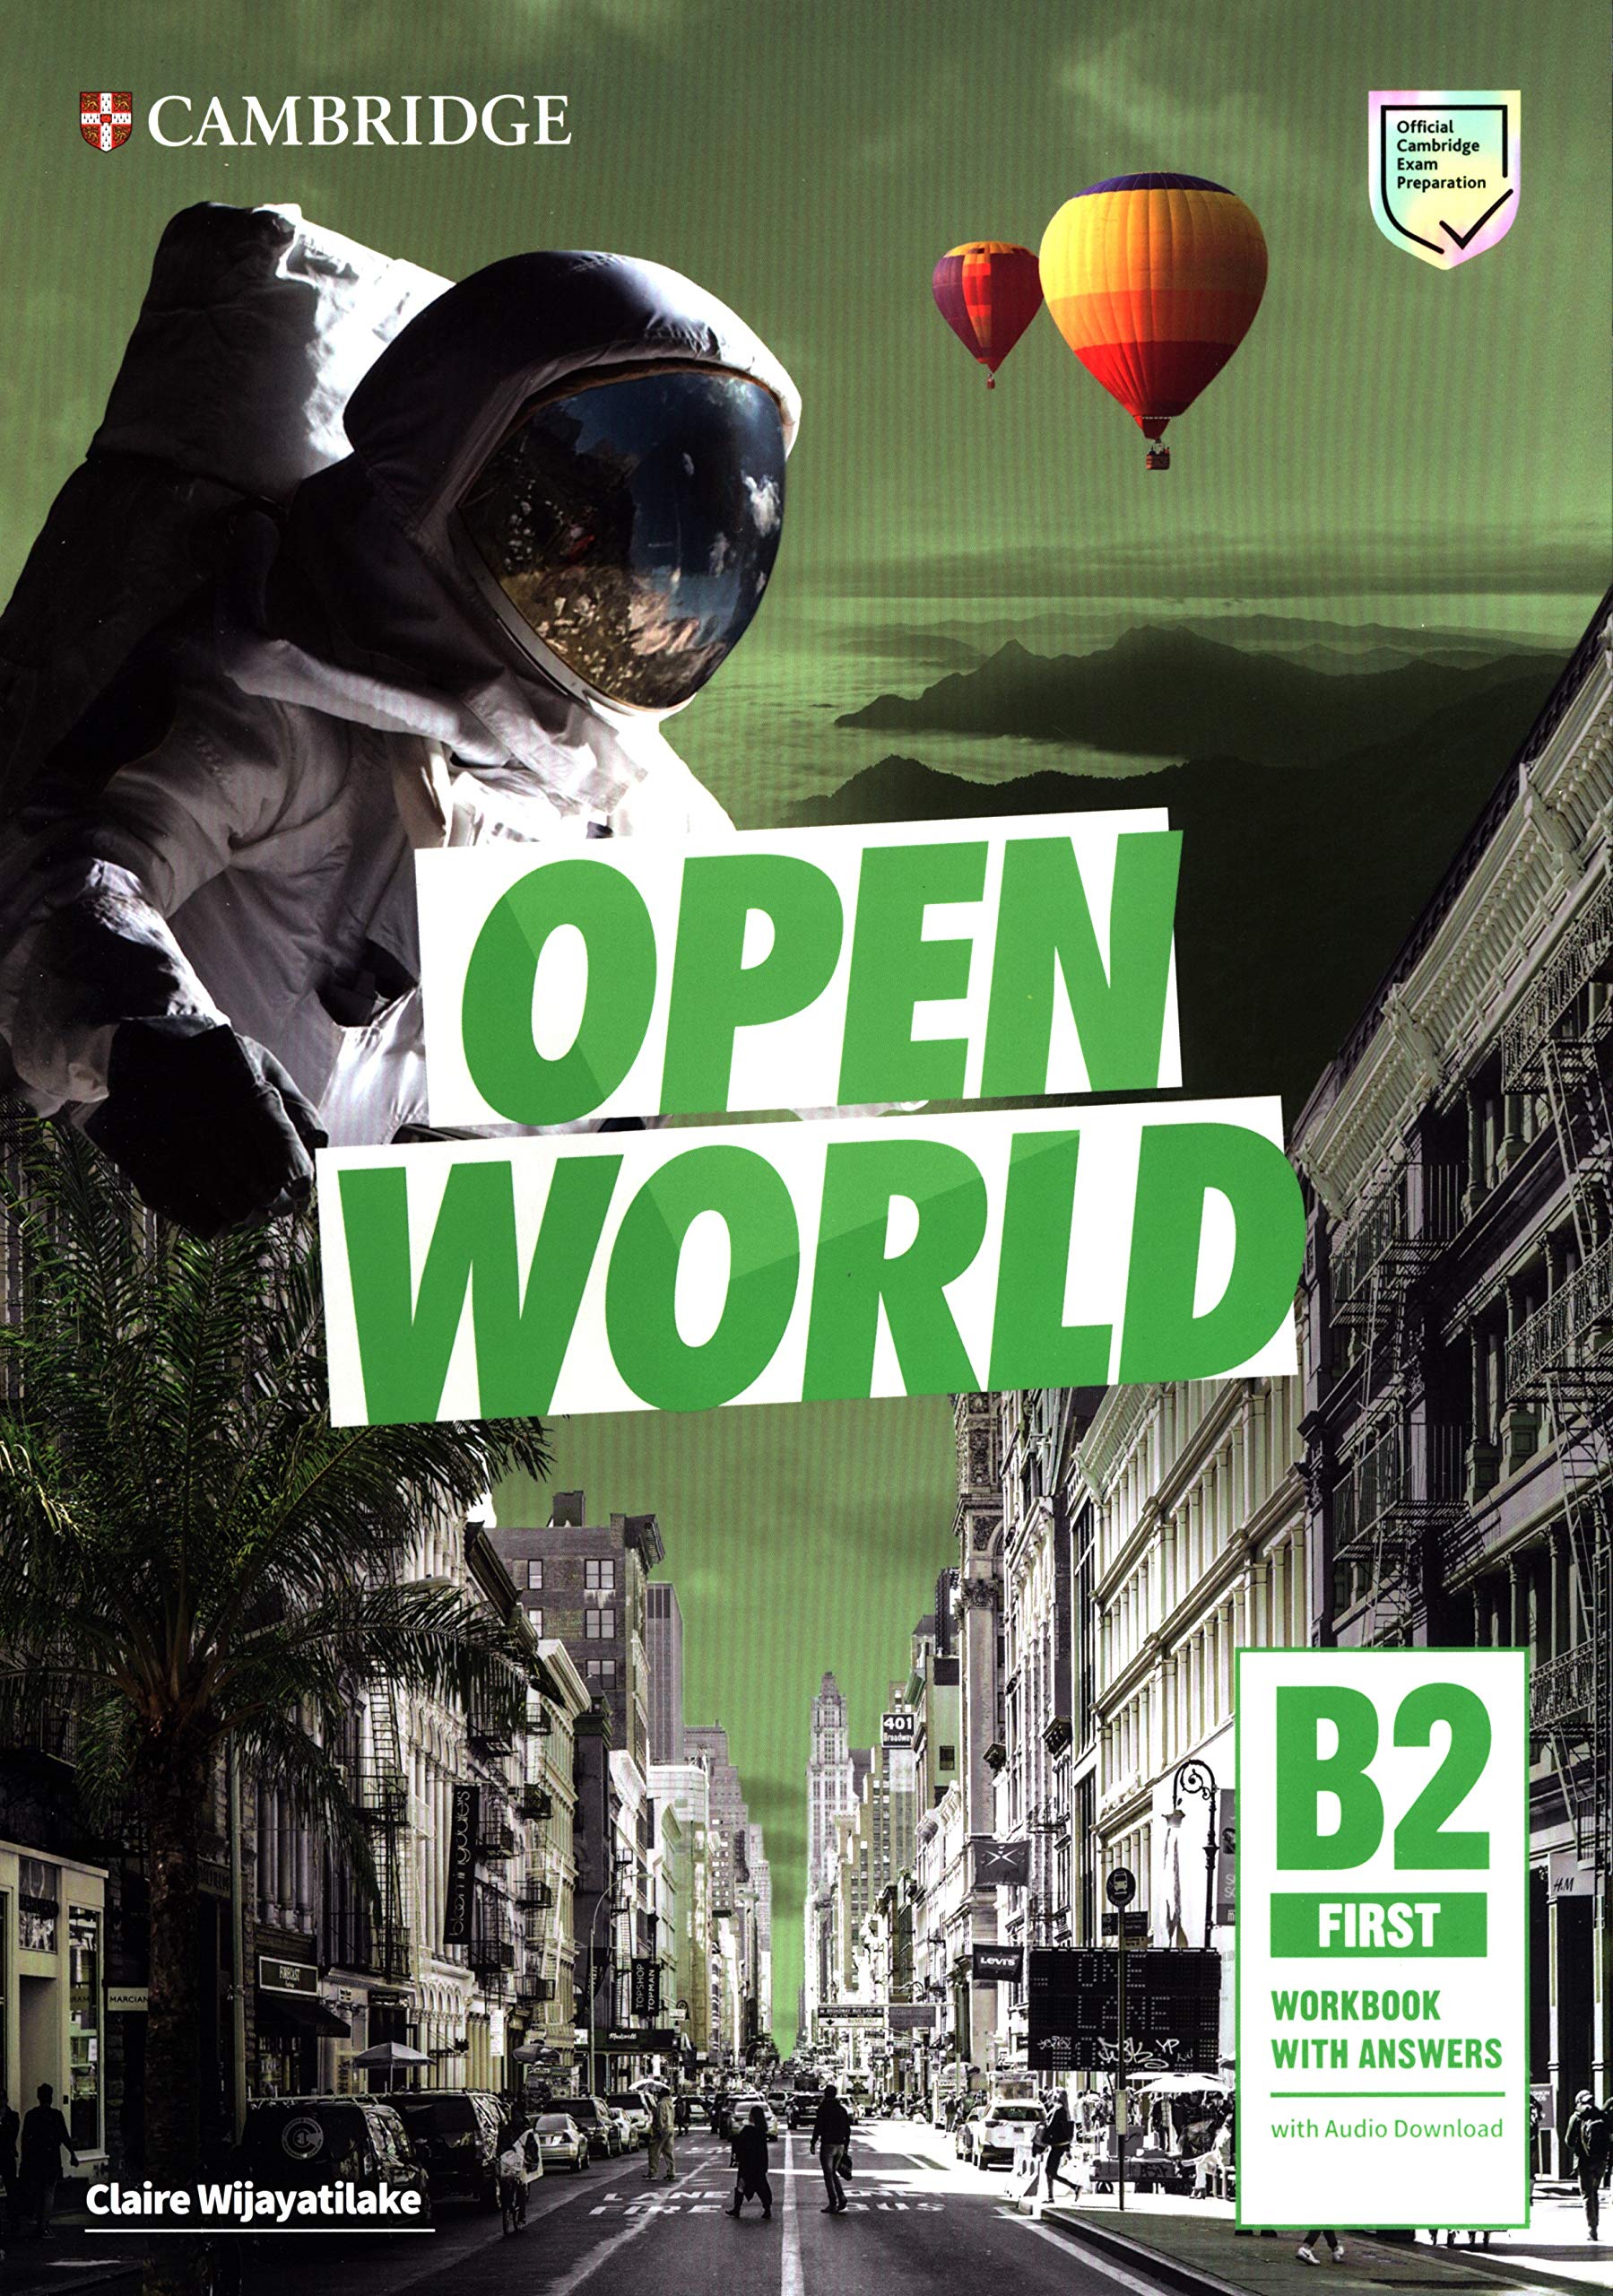 OPEN WORLD FIRST Workbook with Answers + Audio Download